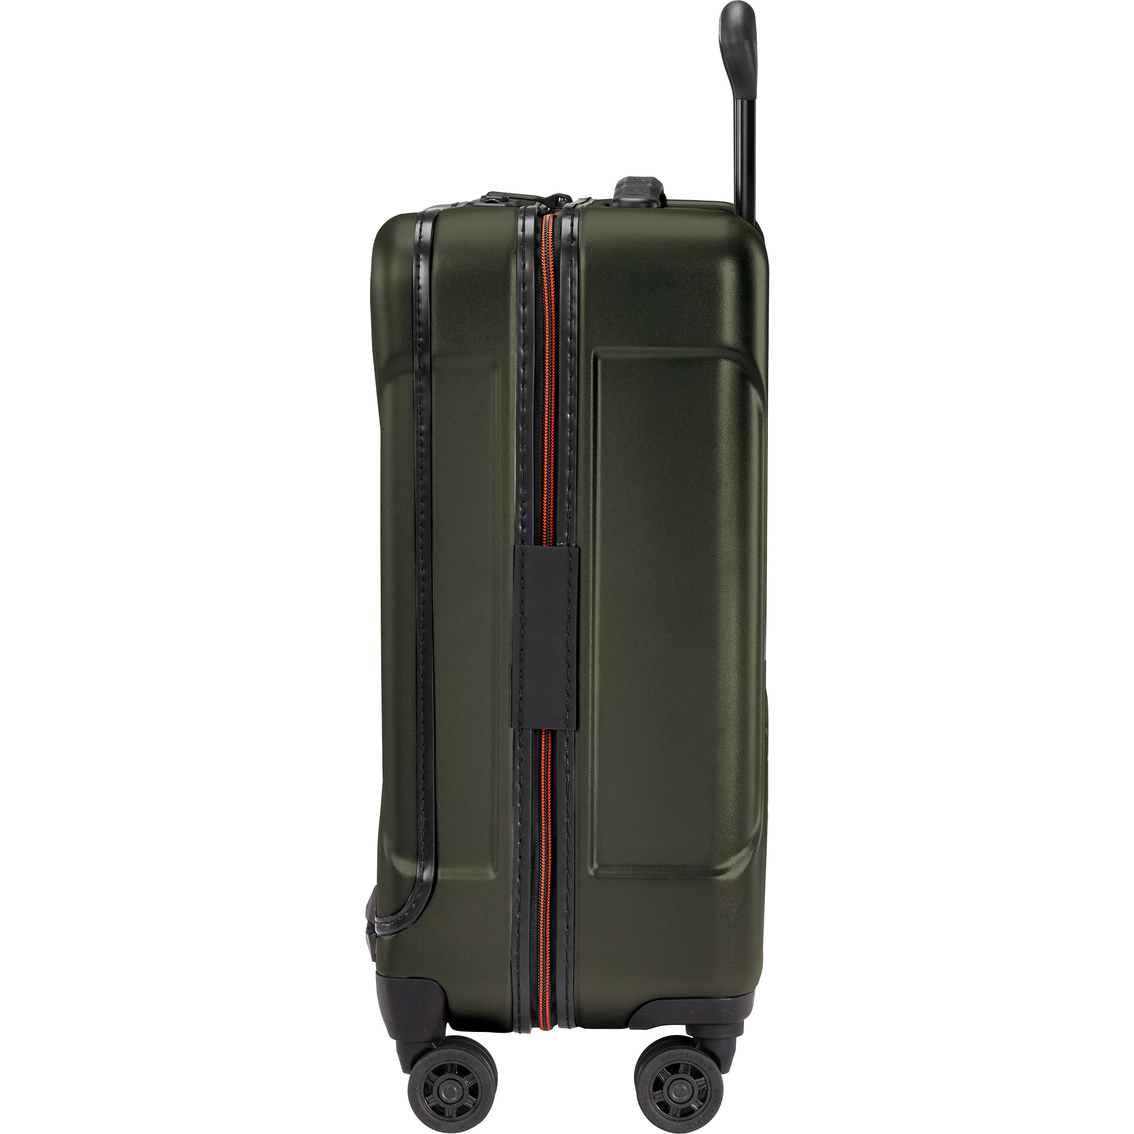 Briggs & Riley Torq 21 in. International Carry-On Spinner - Image 5 of 10